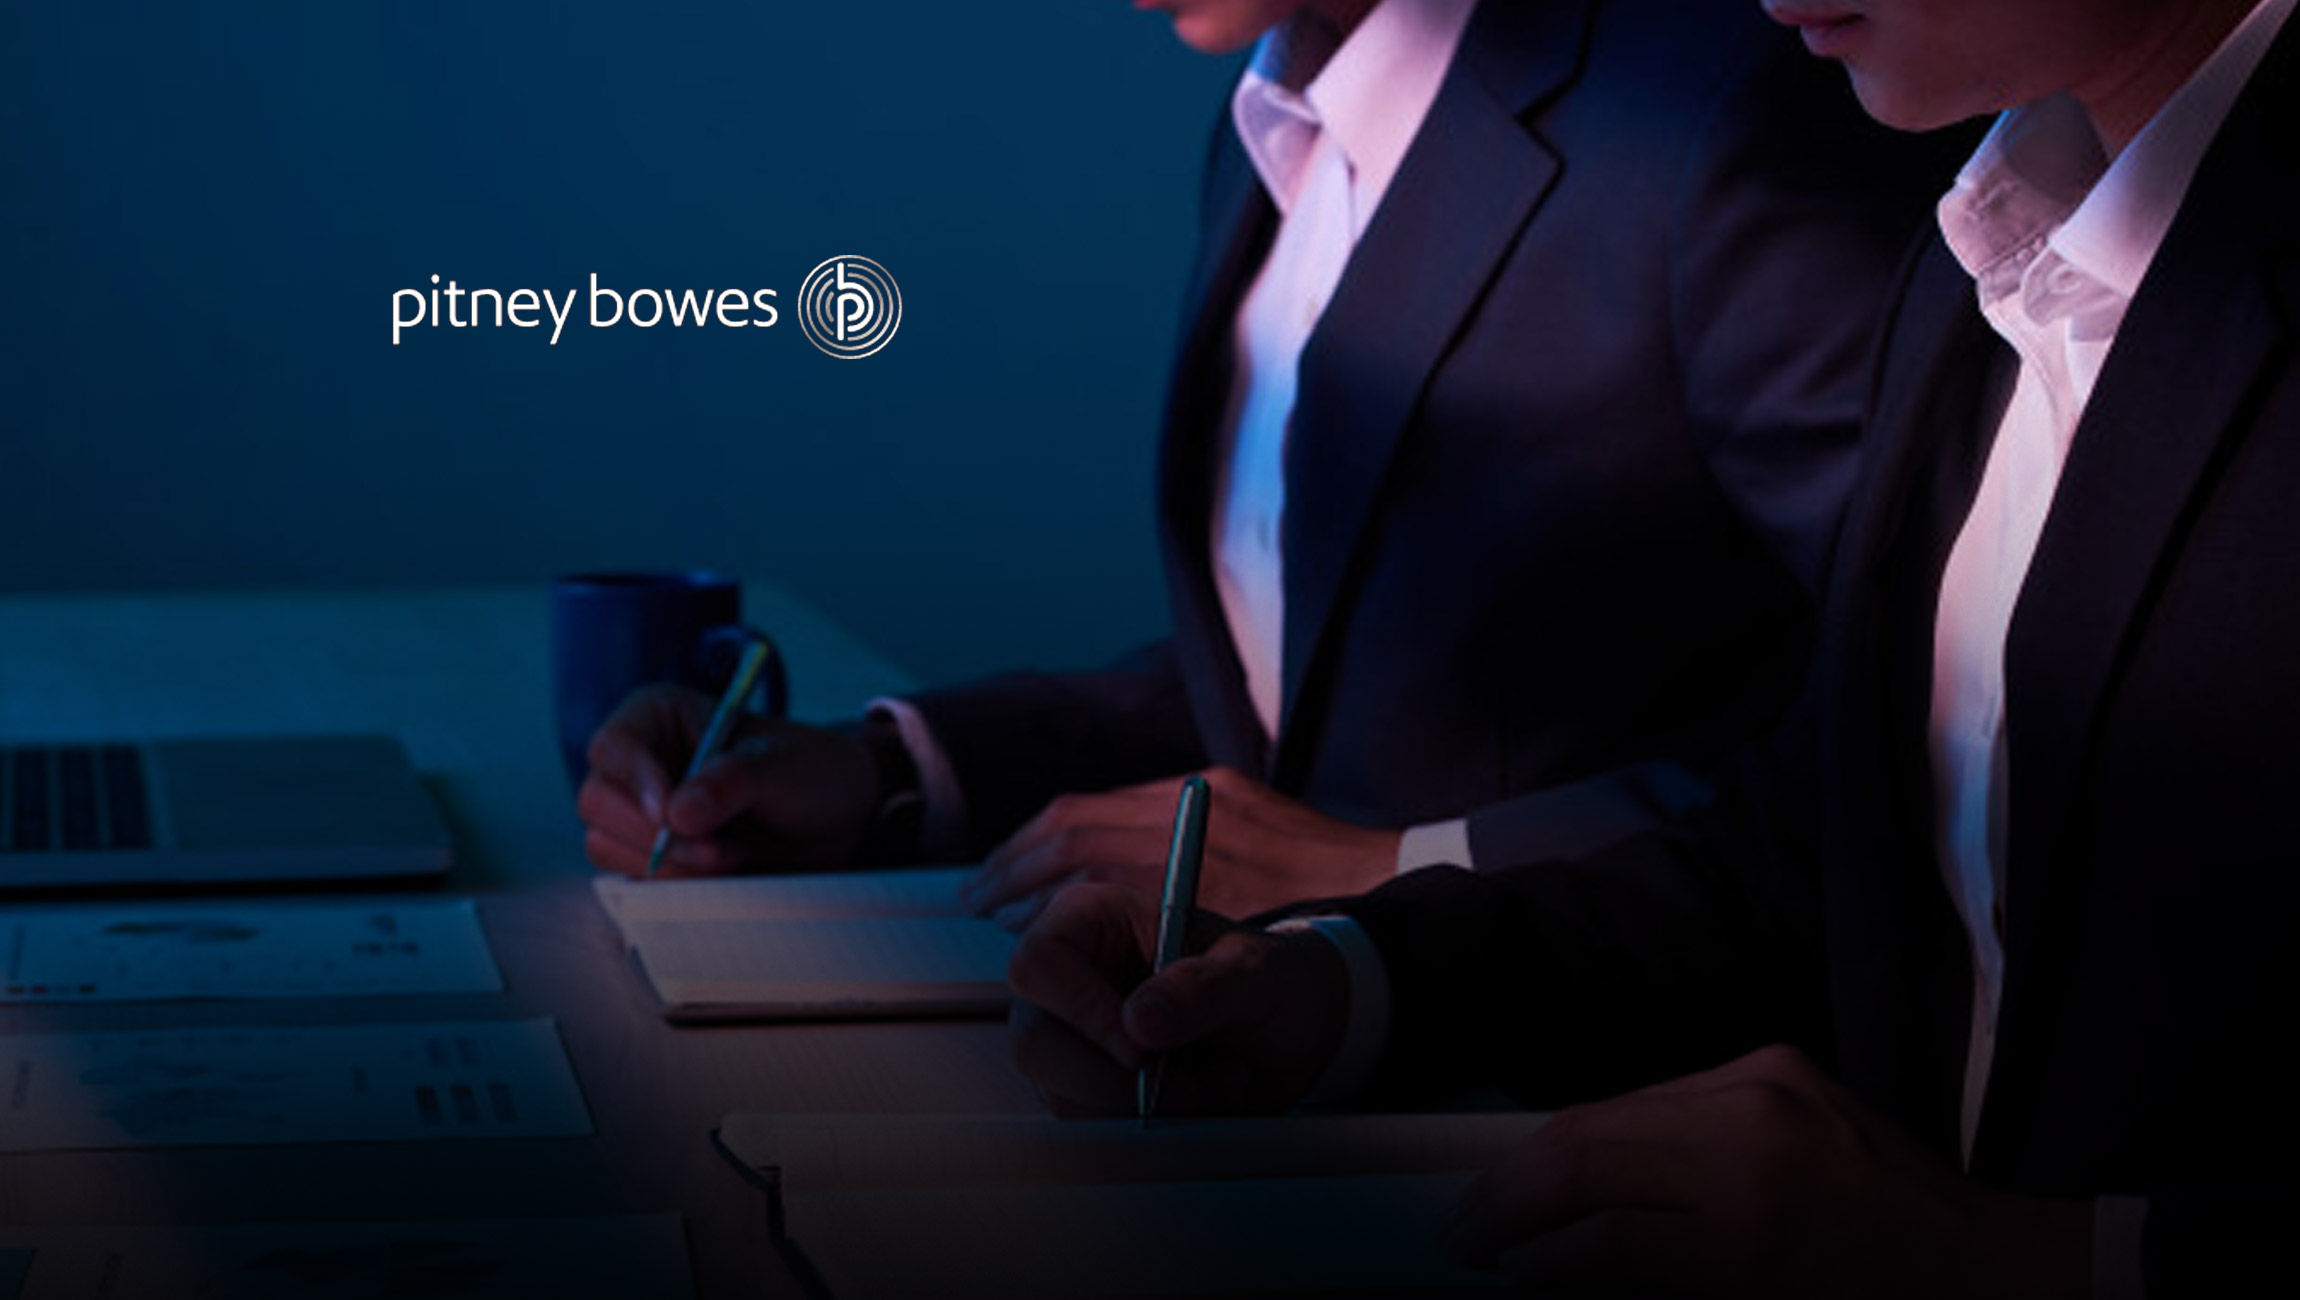 Pitney Bowes Announces Pricing Adjustment as Ecommerce Demand Continues to Surge Ahead of 2020 Peak